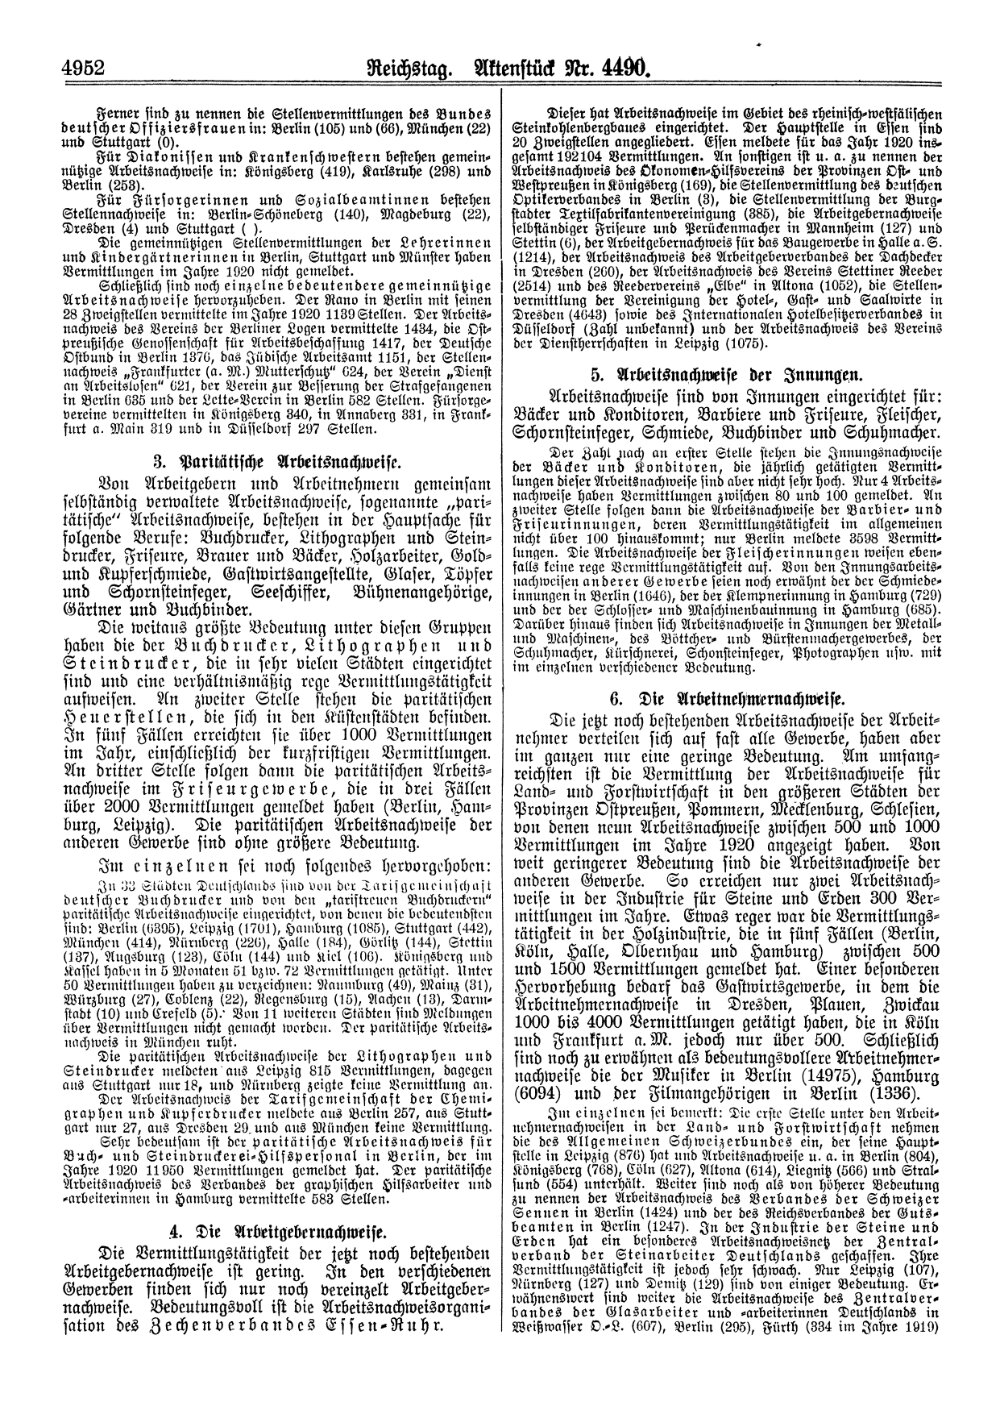 Scan of page 4952